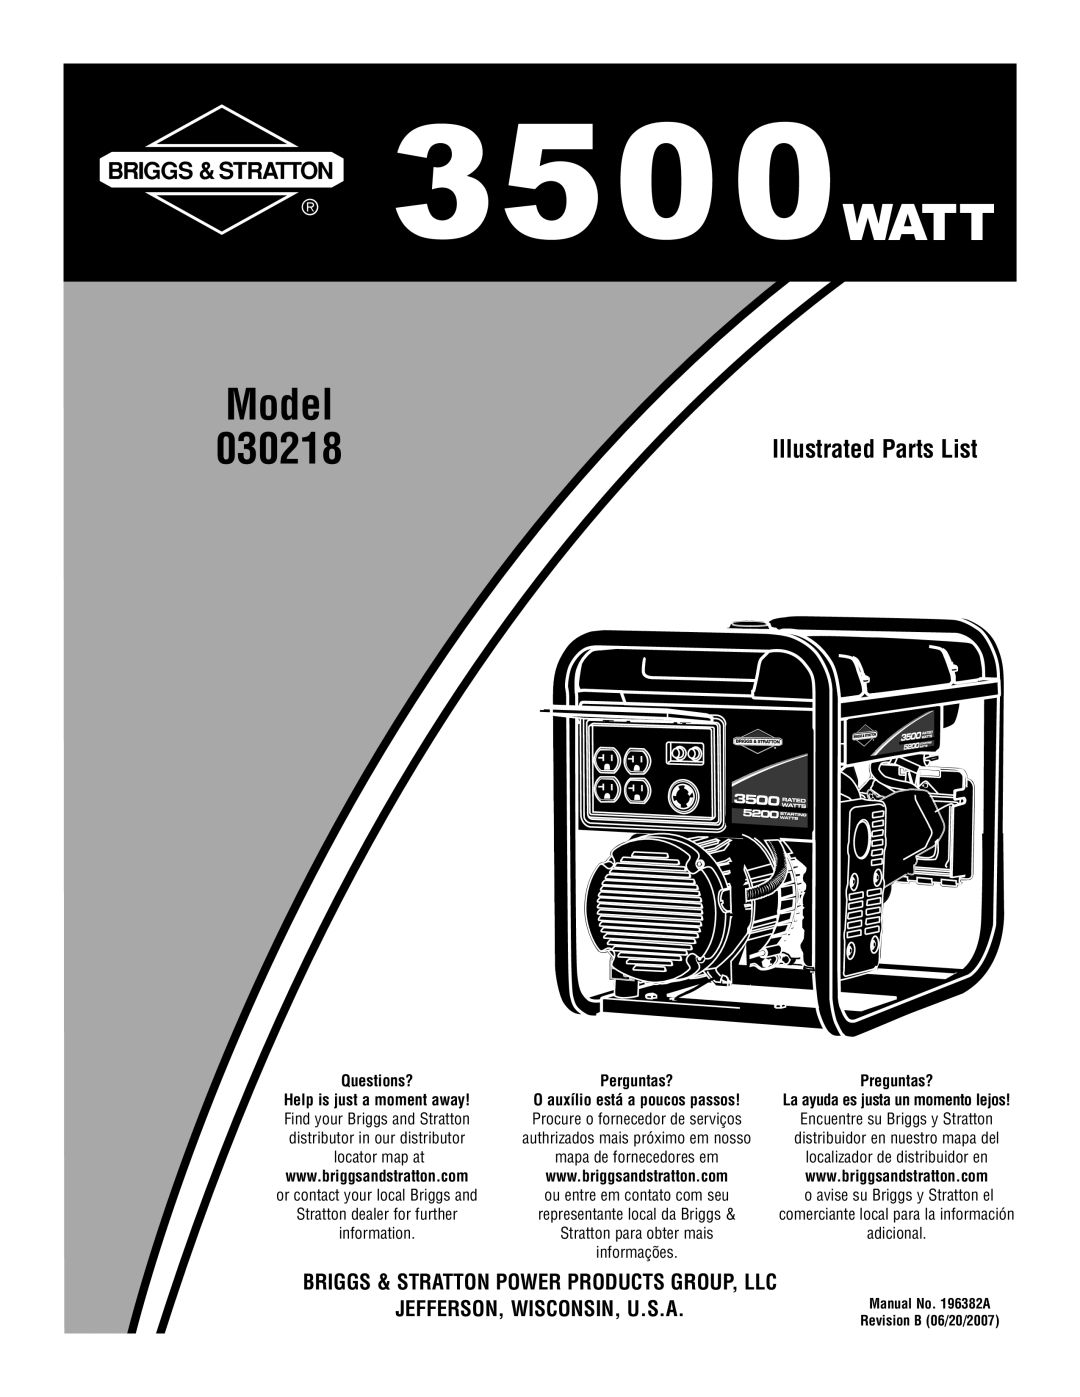 Briggs & Stratton manual Model 030218, Illustrated Parts List, Jefferson, Wisconsin, U.S.A, locator map at, information 